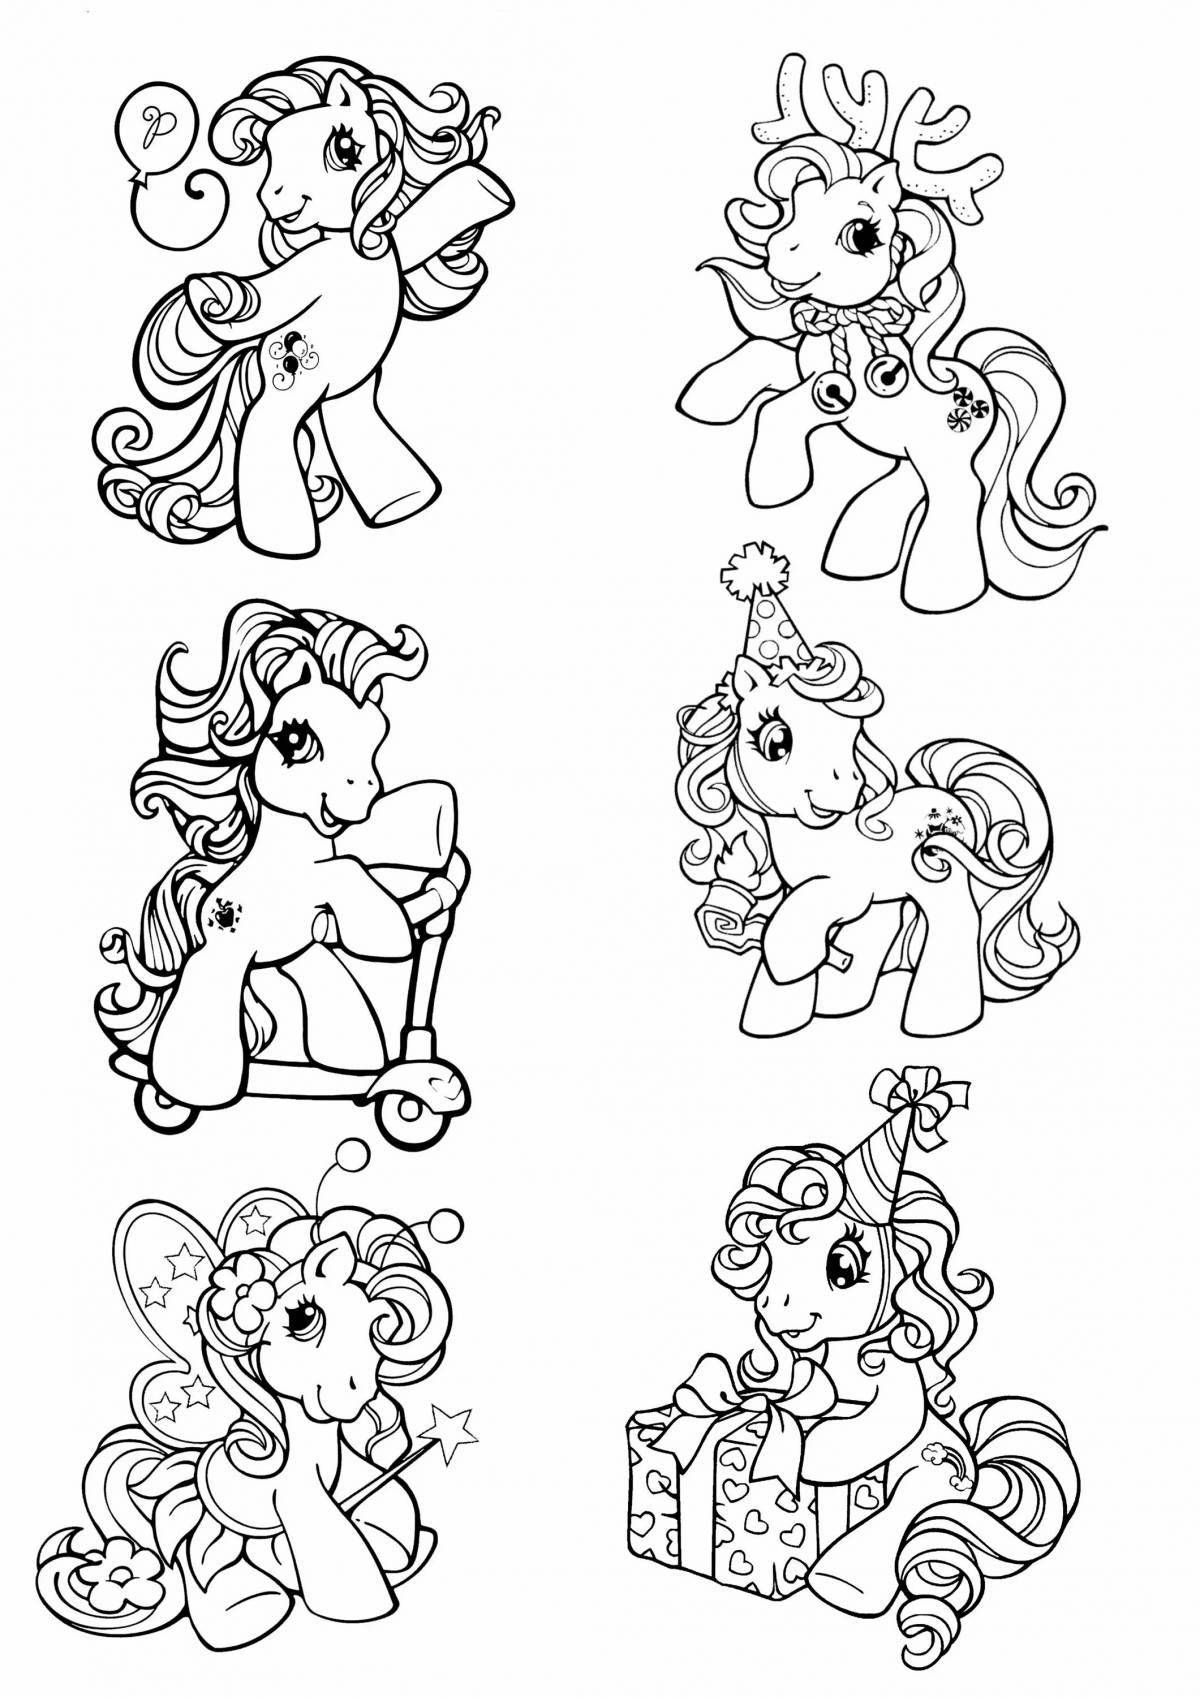 Coloring page shiny pony party